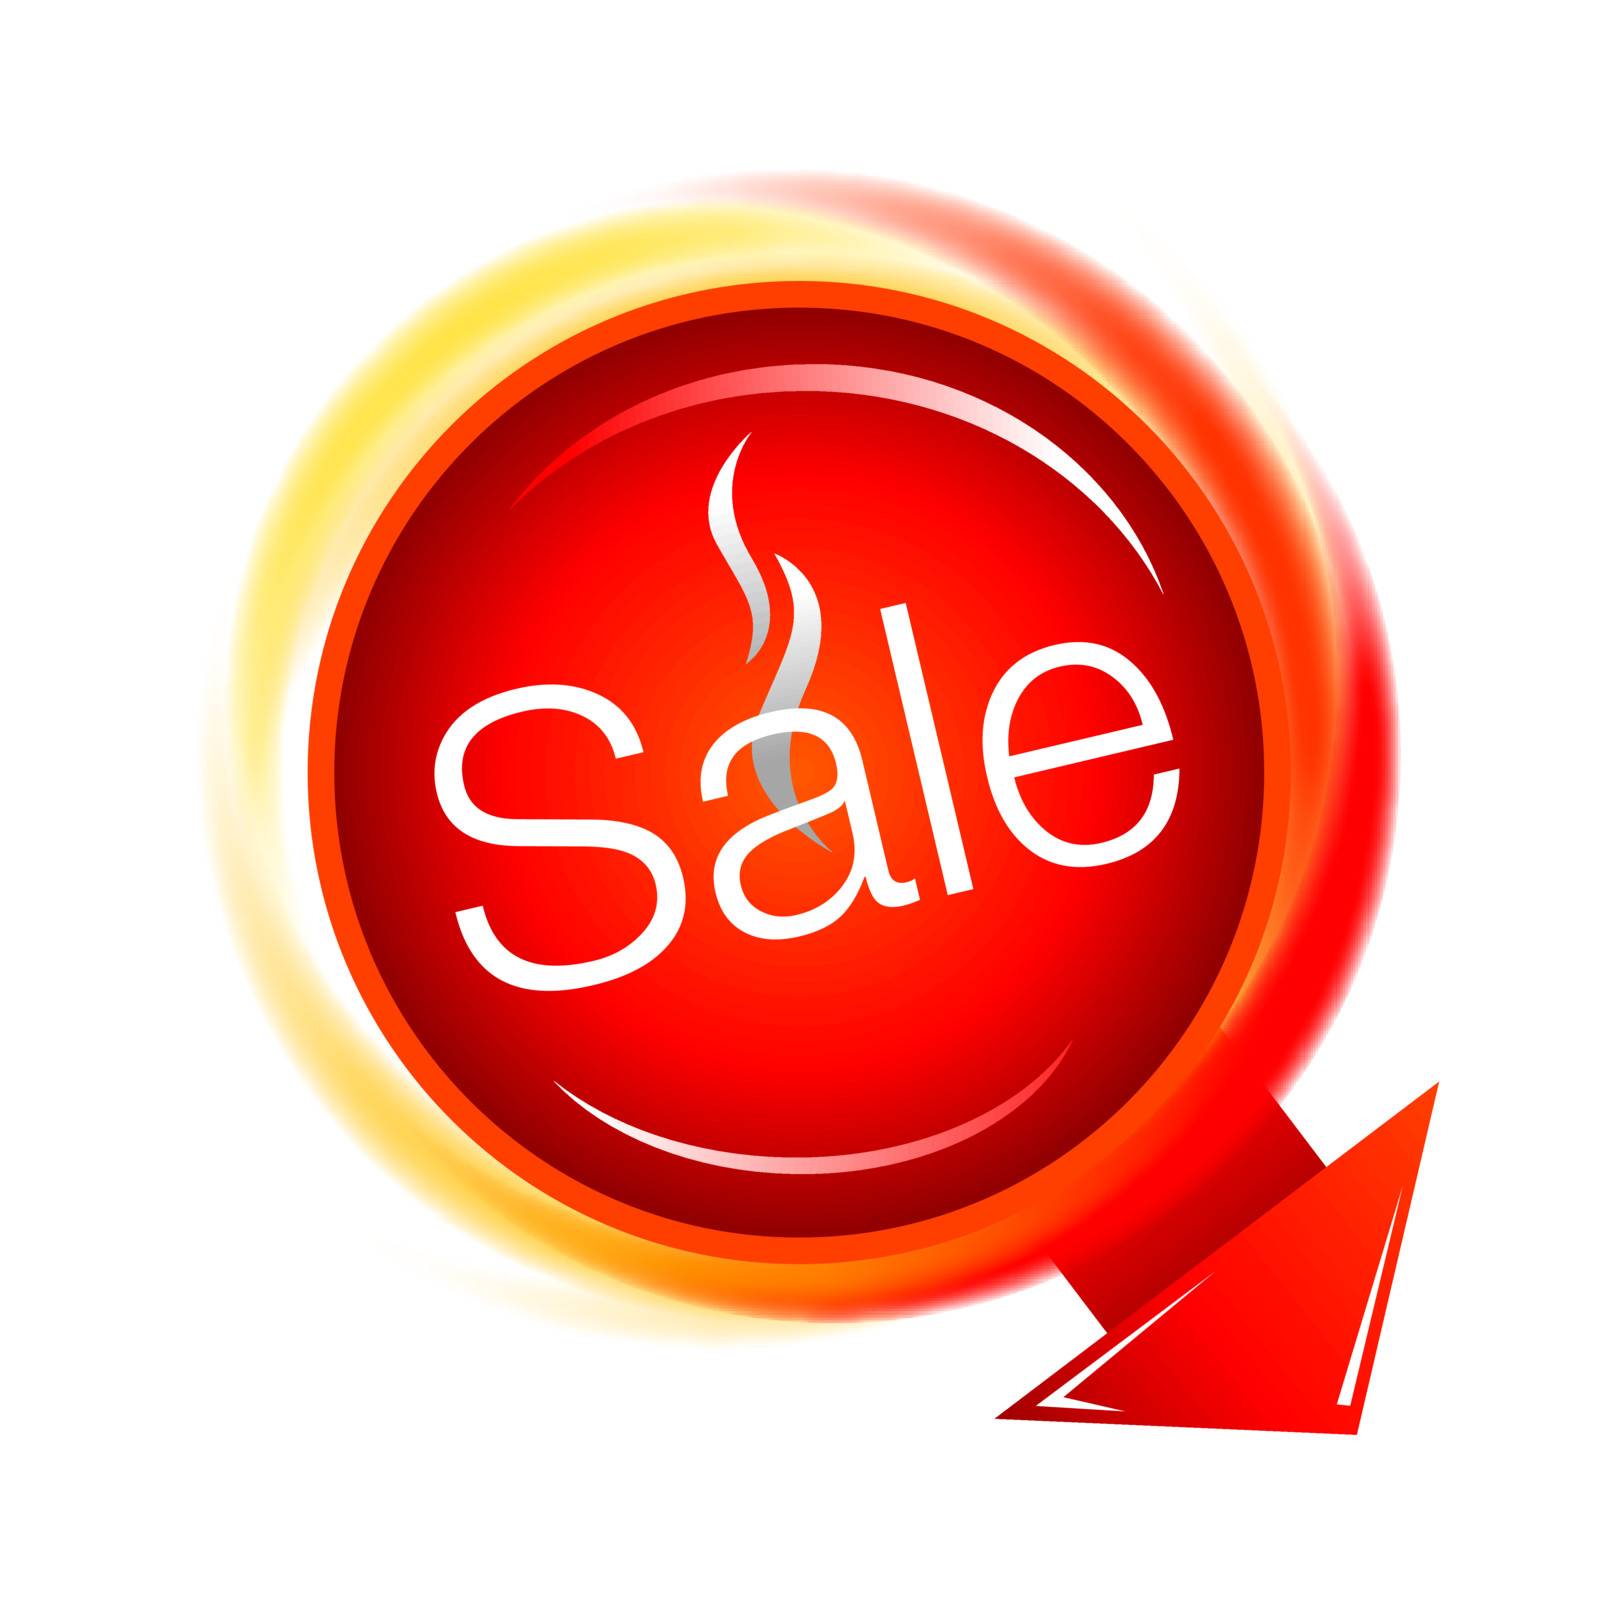 Sale icon design by Myimagine